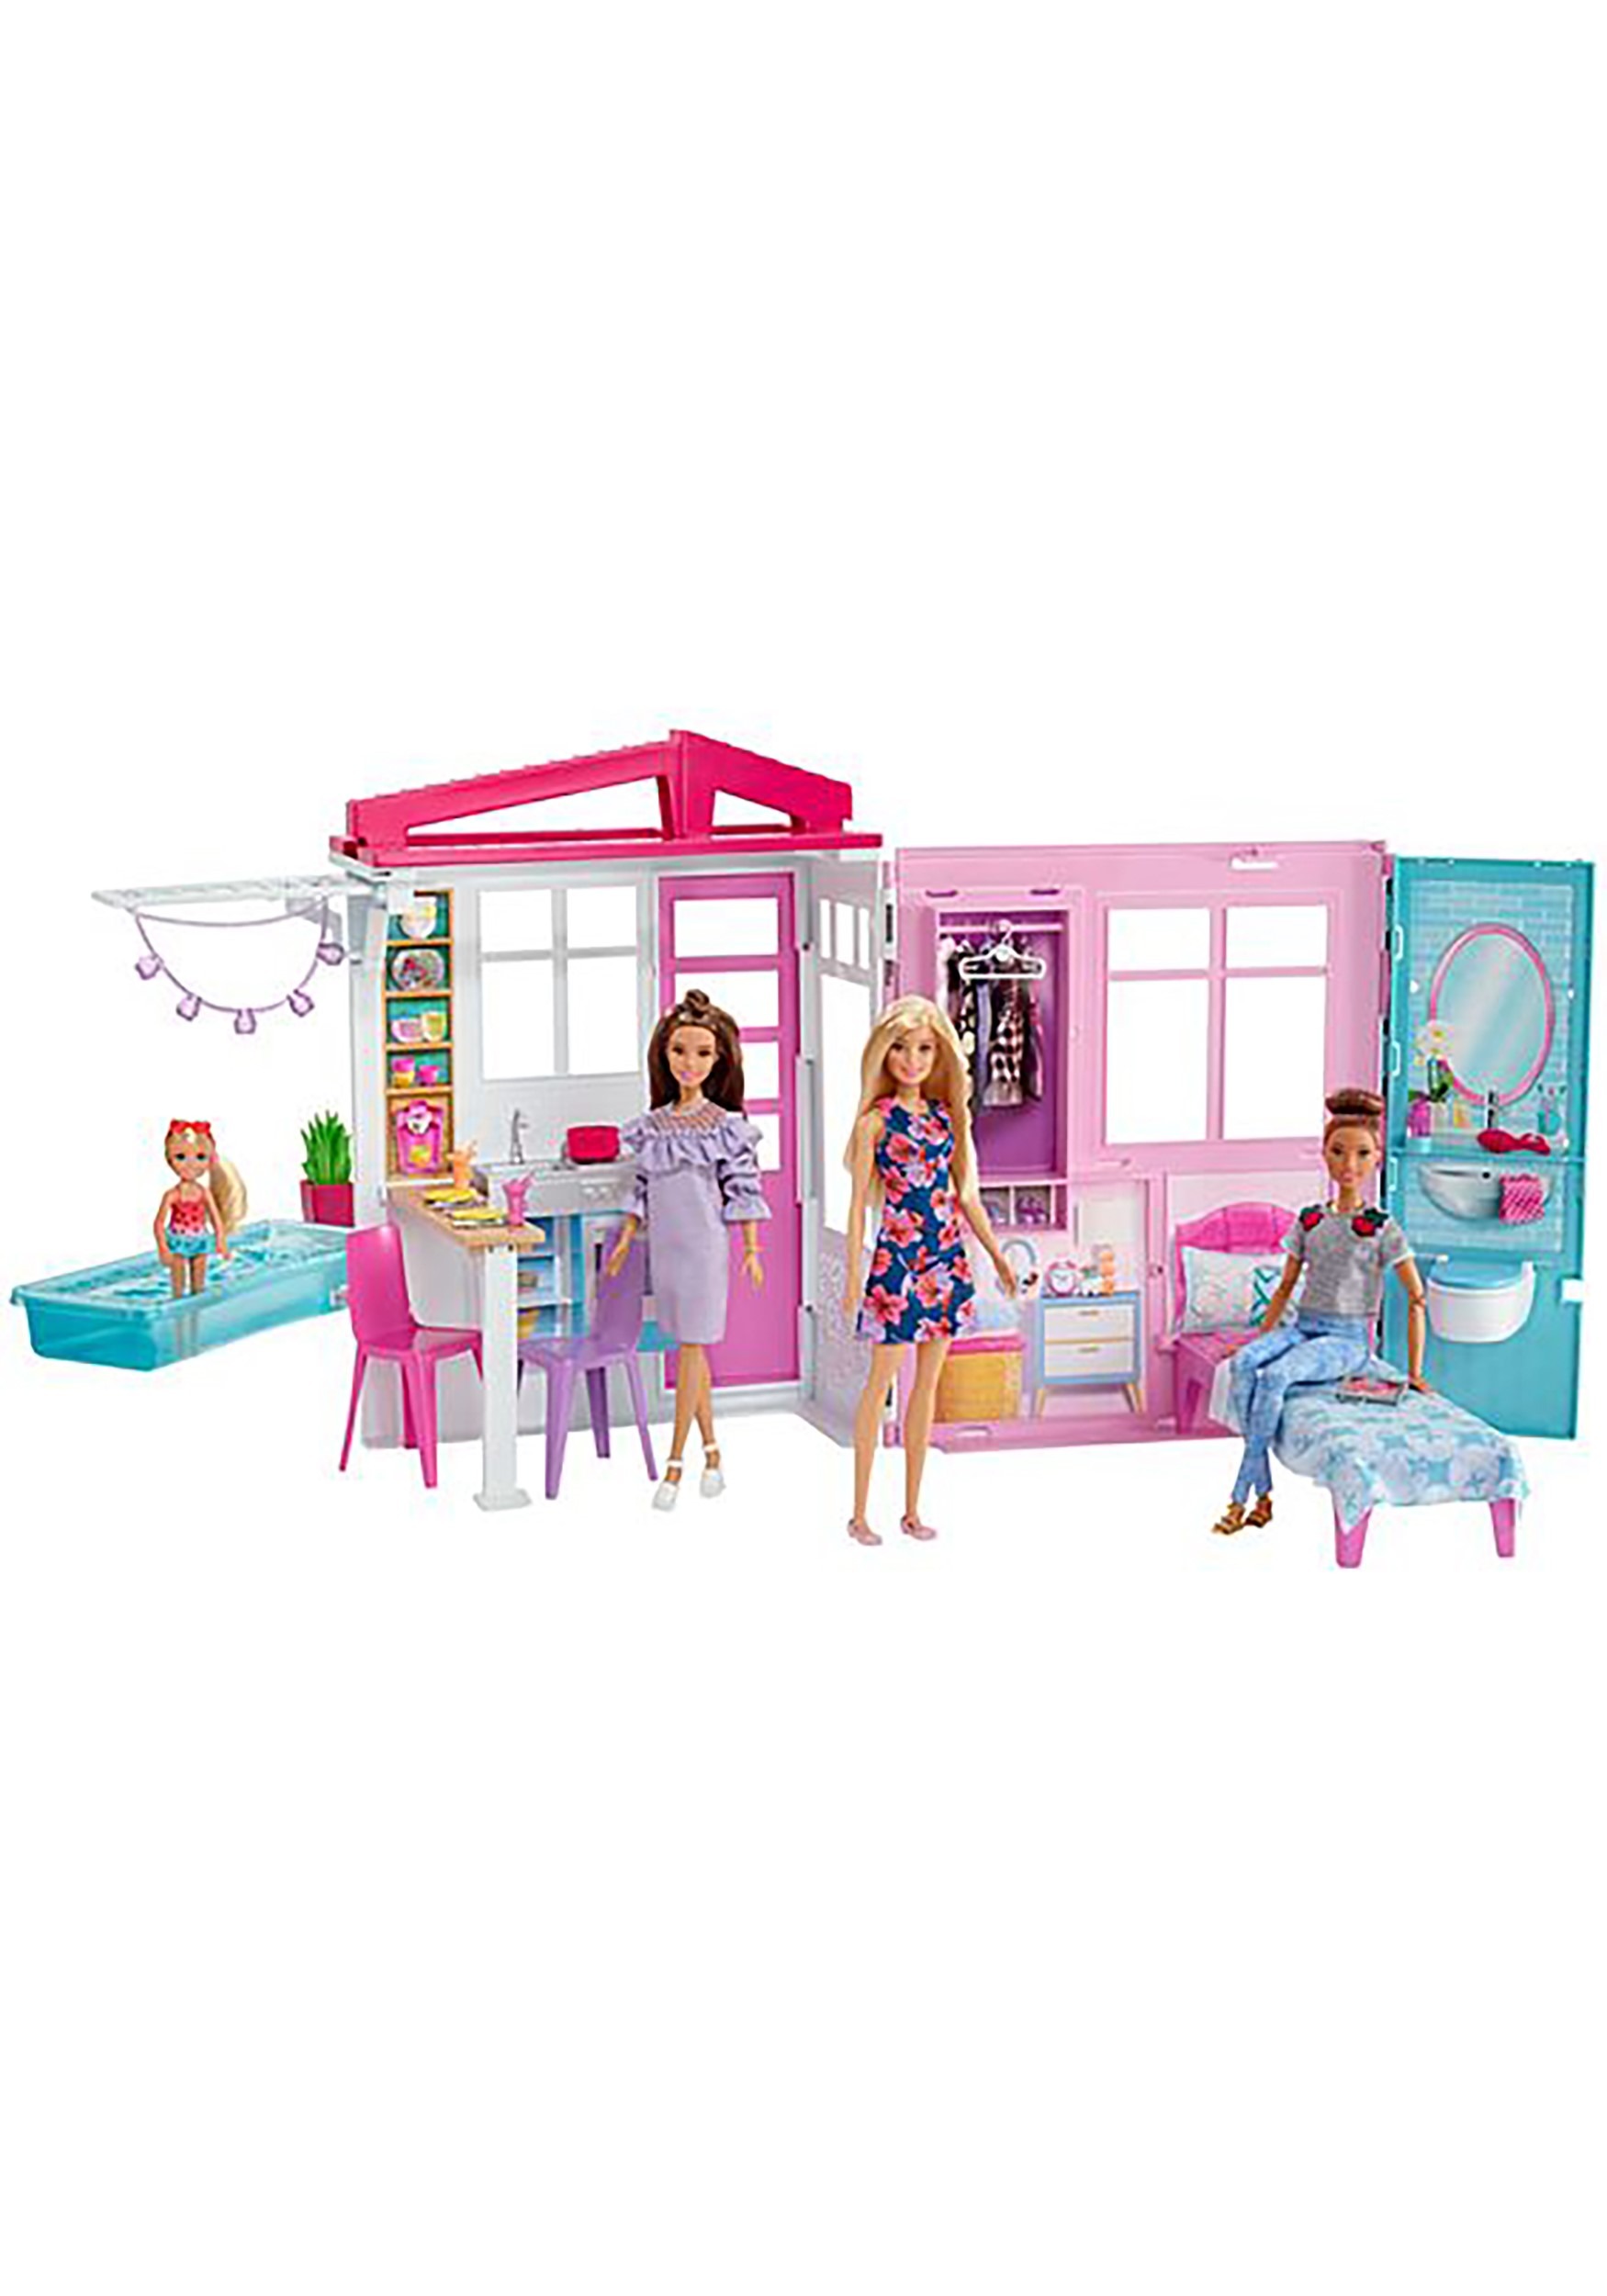 Skinne Accepteret Himlen Barbie Doll and House Play Set